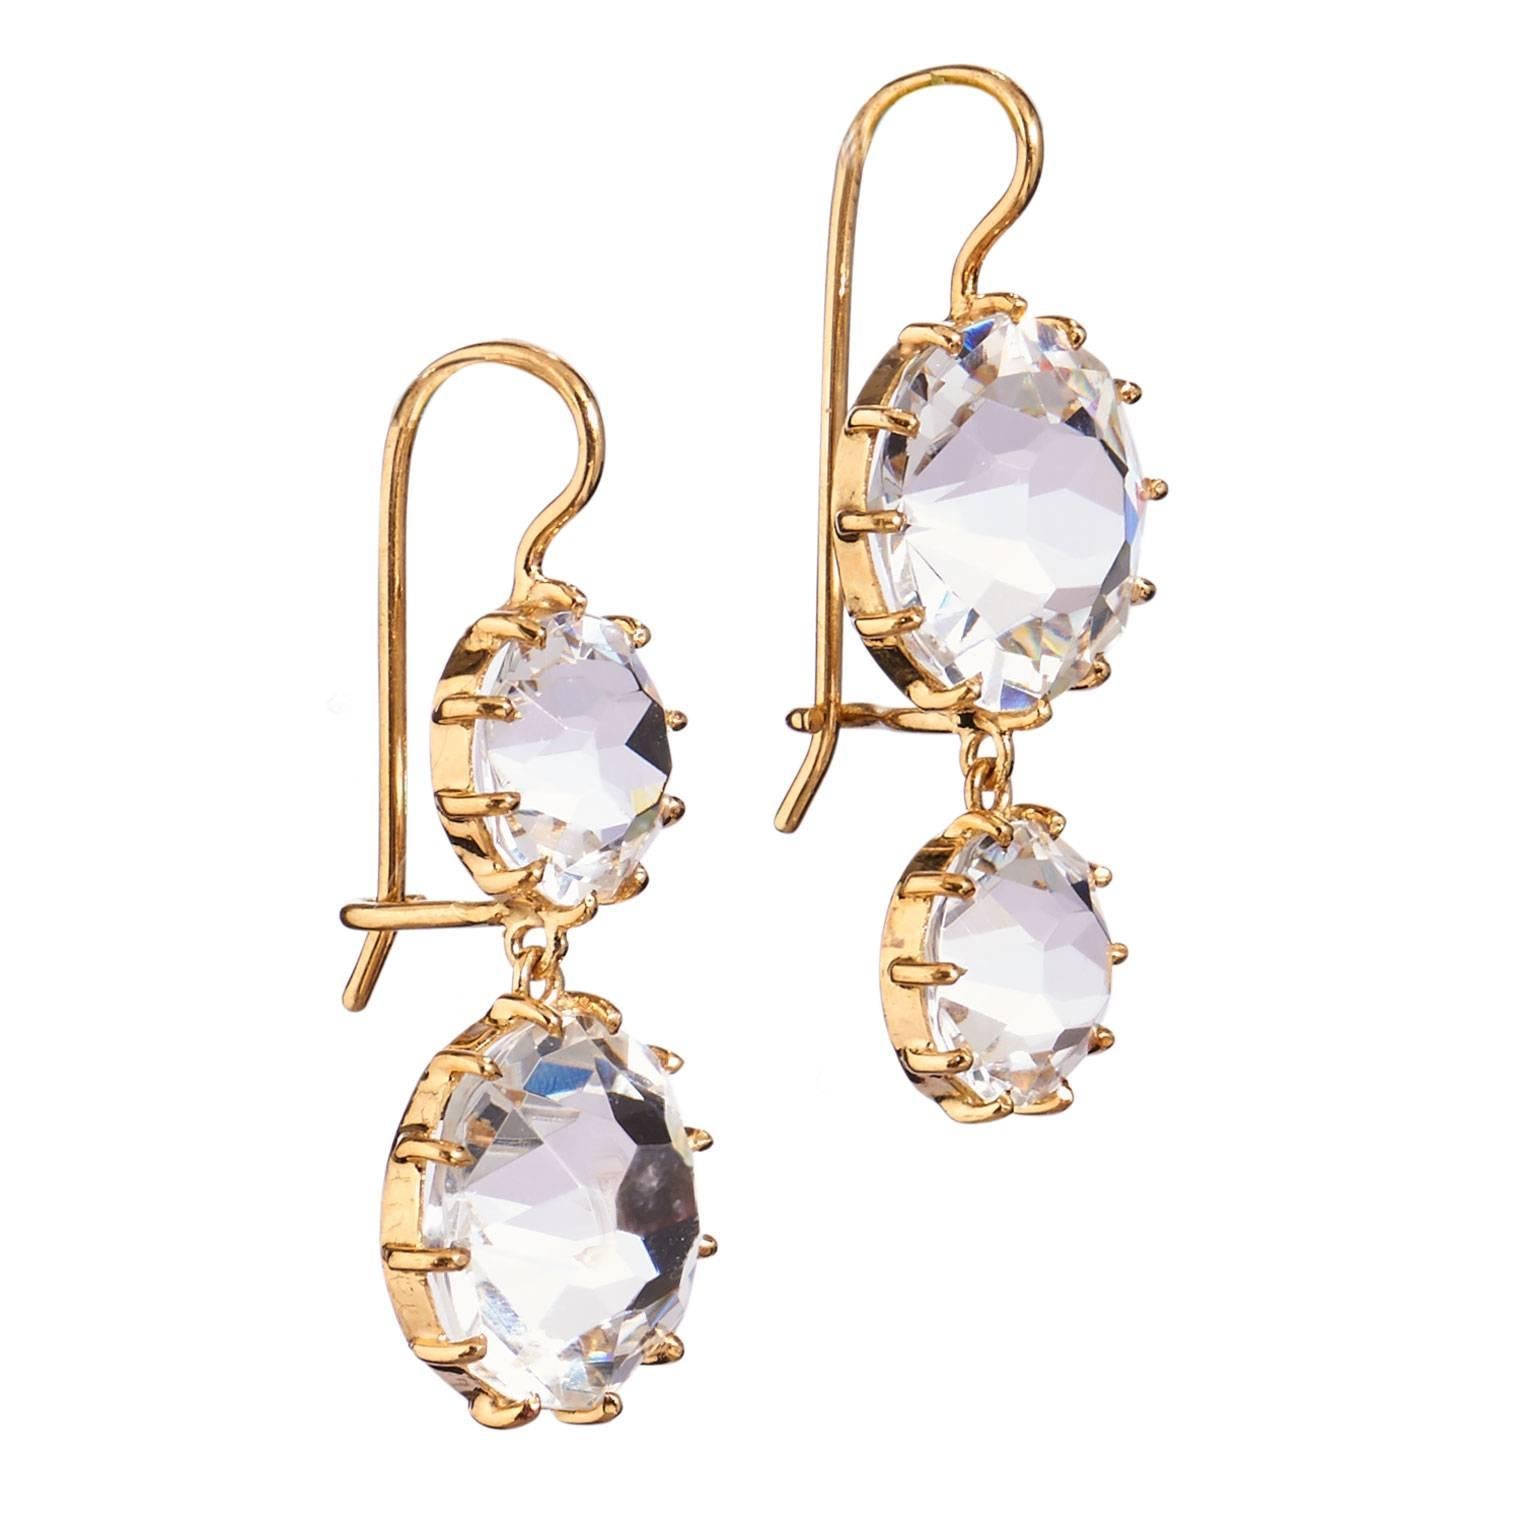 Signed by American designer Renee Lewis these 18 karate yellow gold earrings feature 10 mm and 7.5 mm Rock Quartz Stones set in prongs. The inverted design allows for motion of the bottom stones to scintillate spectacularly catching the eye and